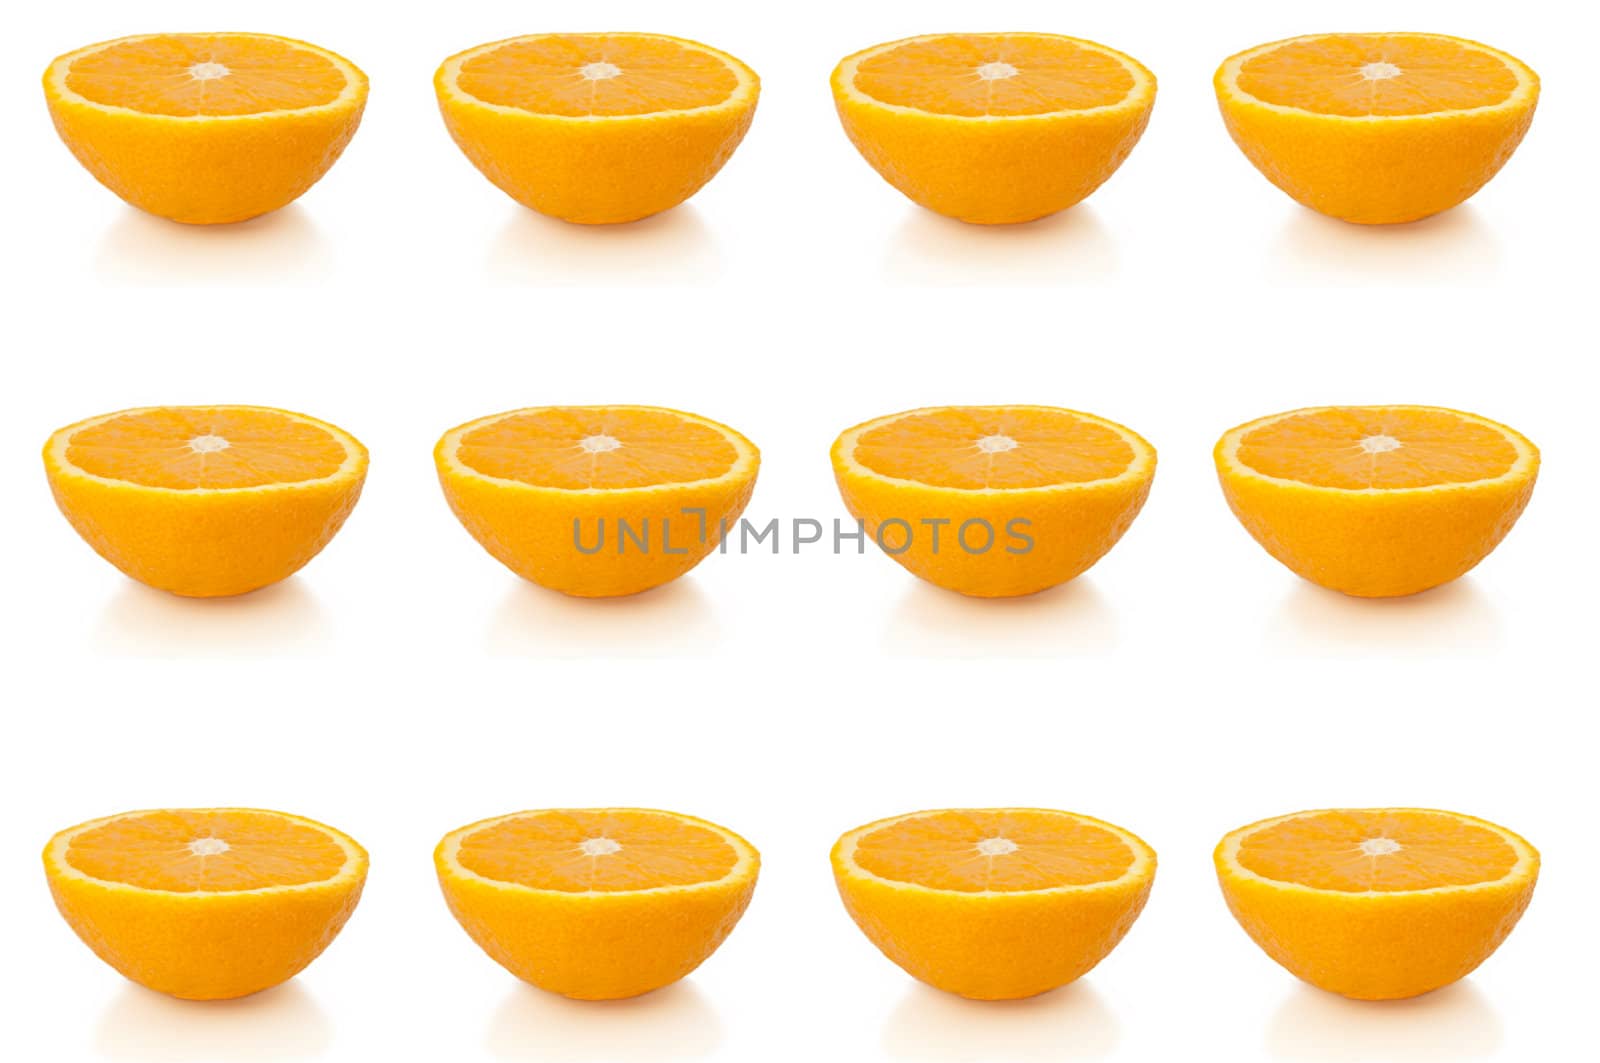 twelve small orange halves arranged in horizontal lines along the bottom, middle and top of the image and over white.